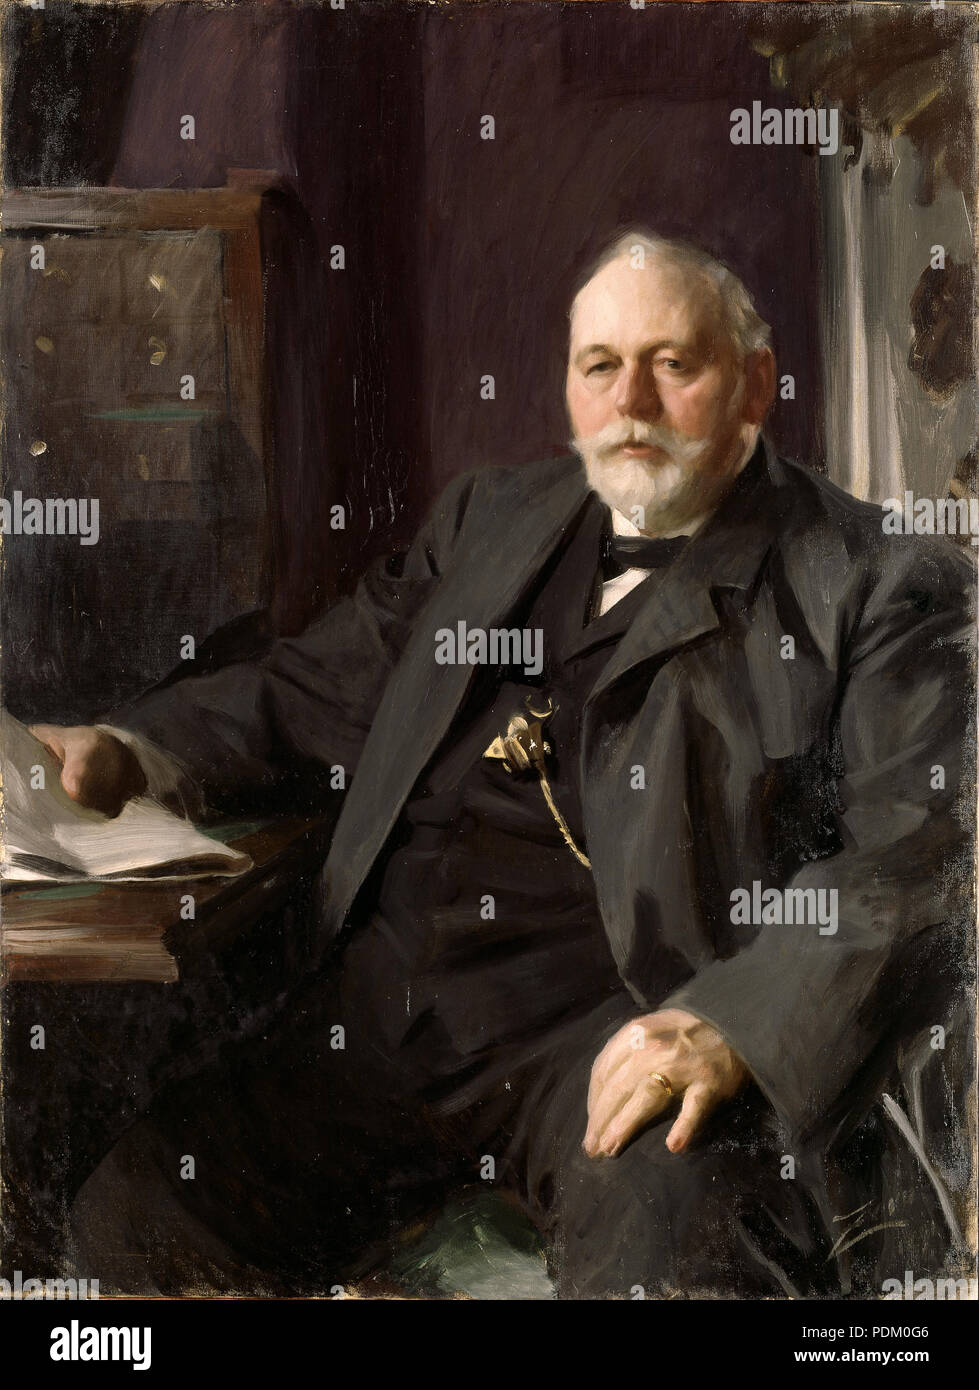 25 Mr Frans R. Heiss (Anders Zorn) - Nationalmuseum - 19727 Stock Photo